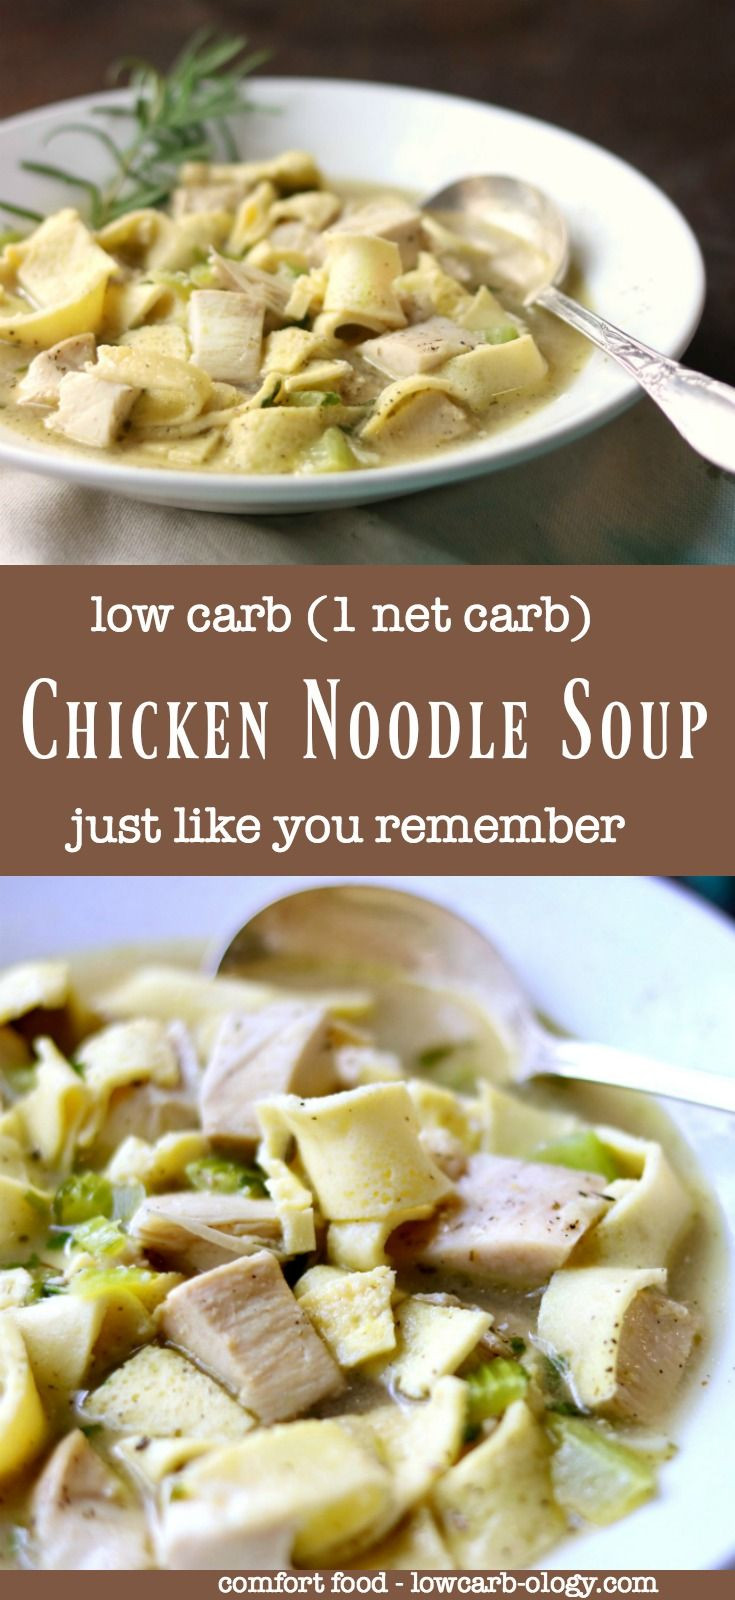 Low Carb Egg Noodles Recipe
 Homemade Chicken Noodle Soup Low Carb fort Food